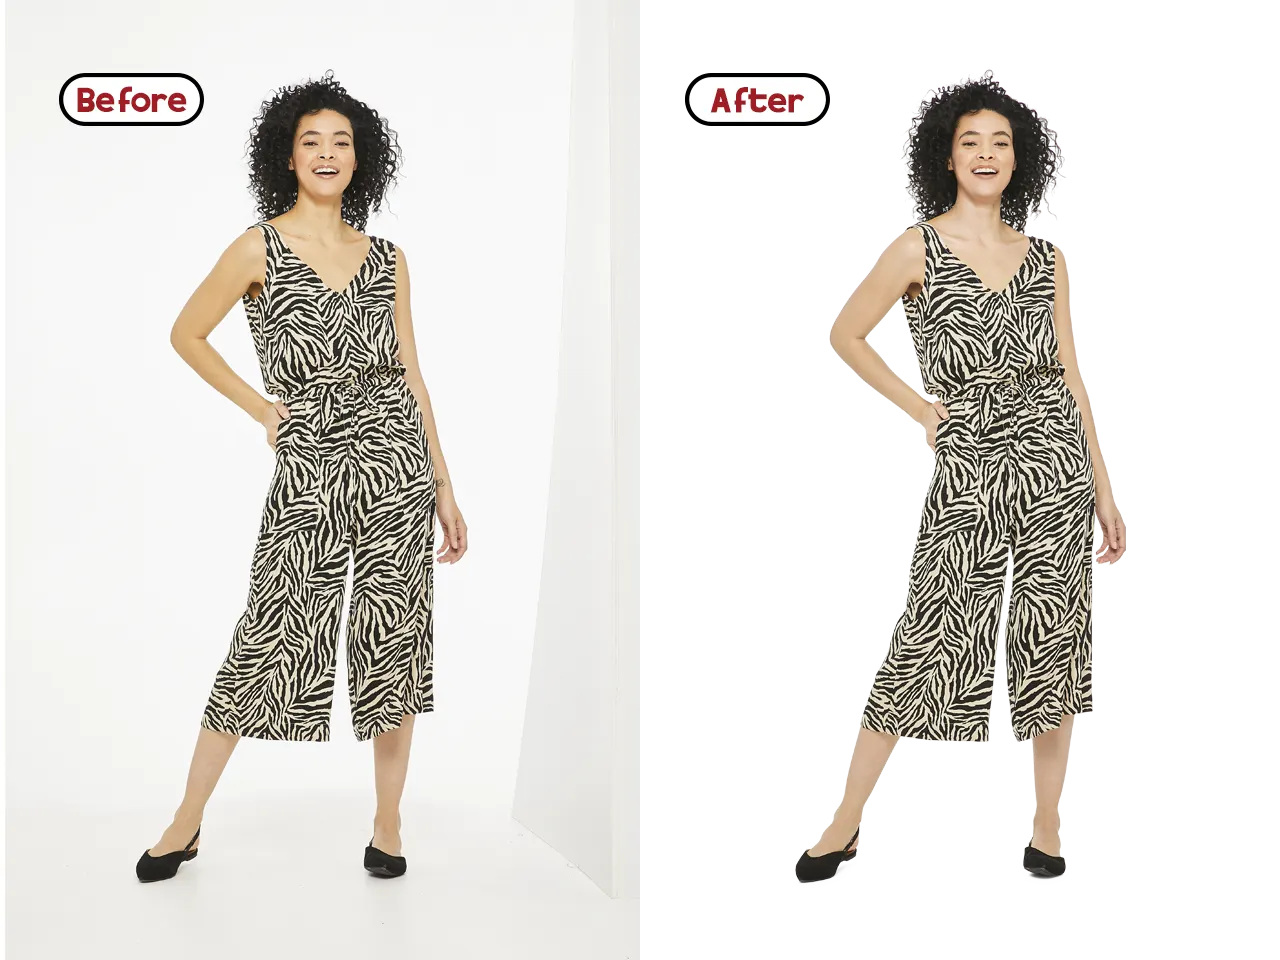 Model clipping path, remove background & hair masking service Photoshop graphinery